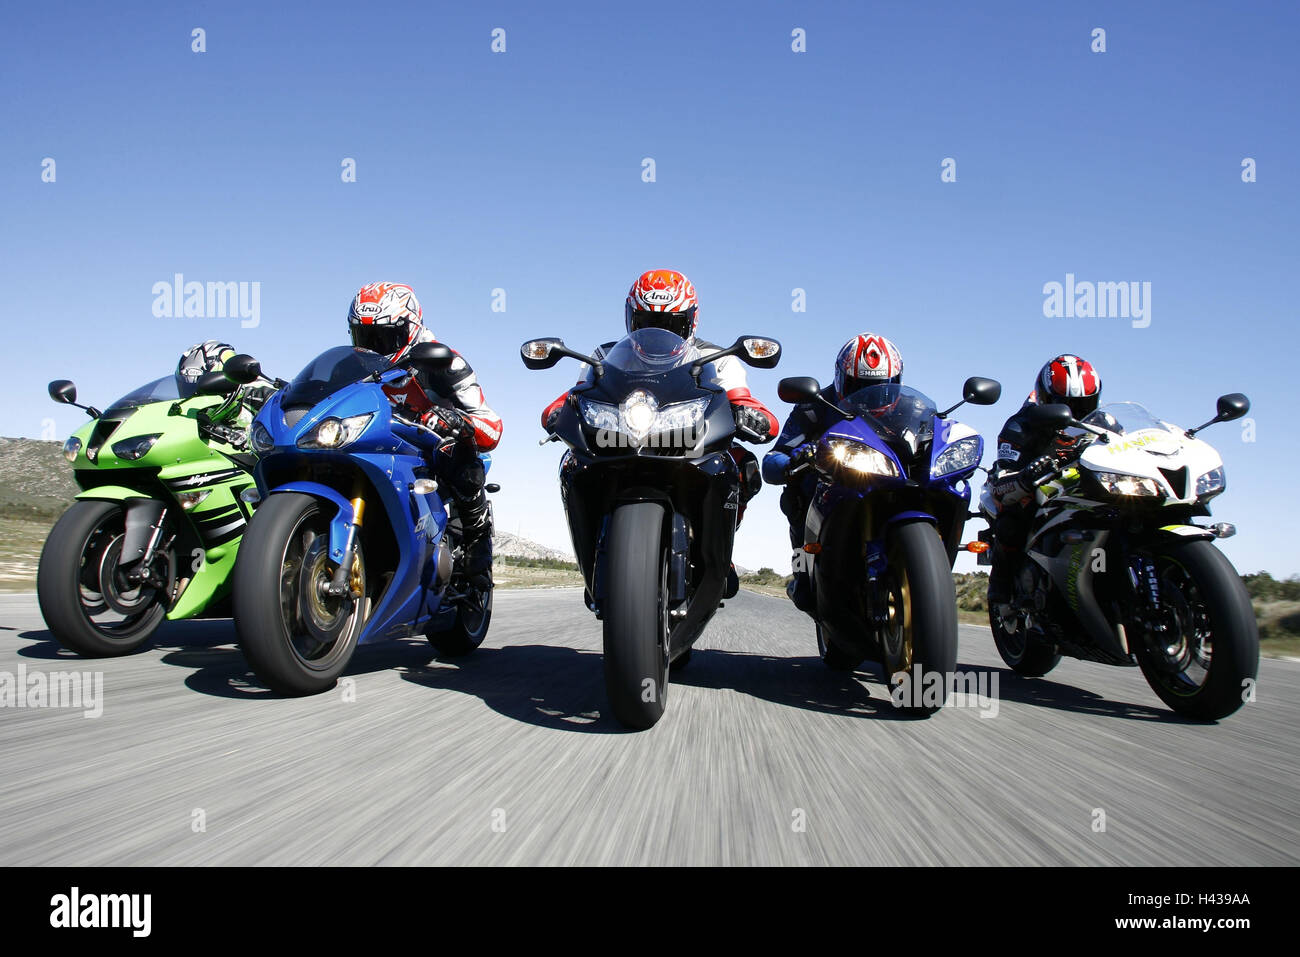 Street, supersport motorcycles, trip, front view, Stock Photo